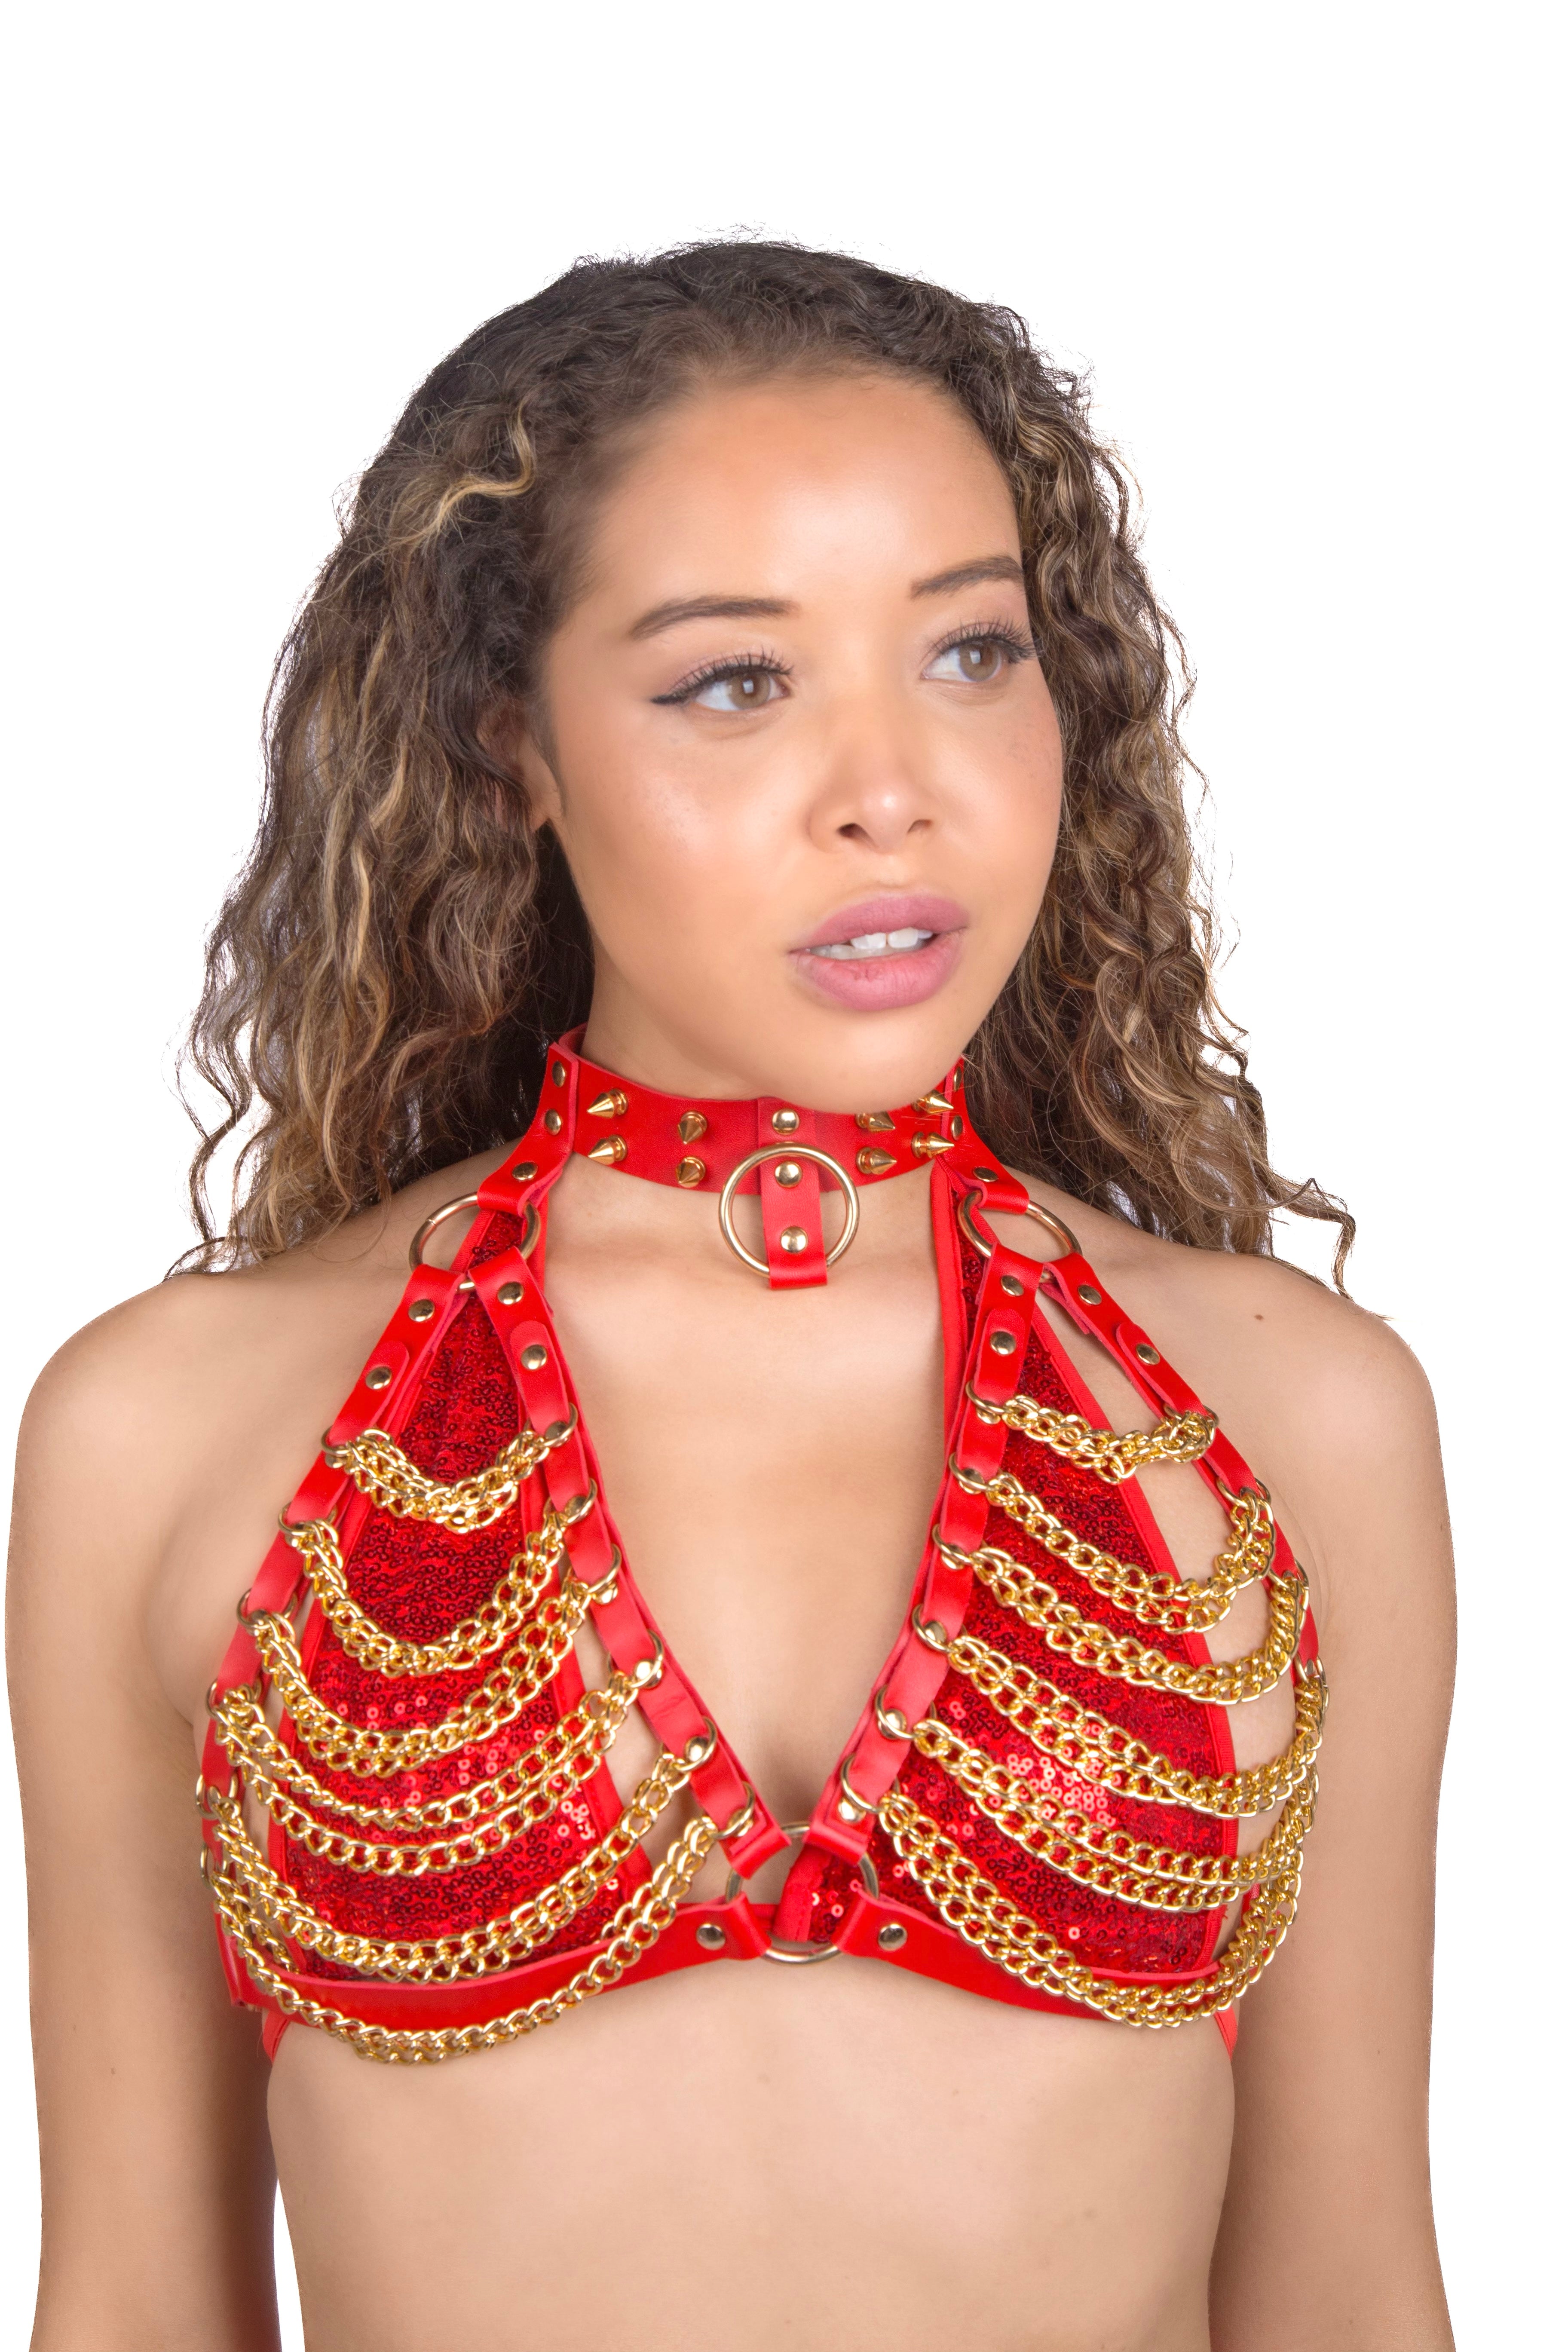 Red/Gold Harness Chain Top